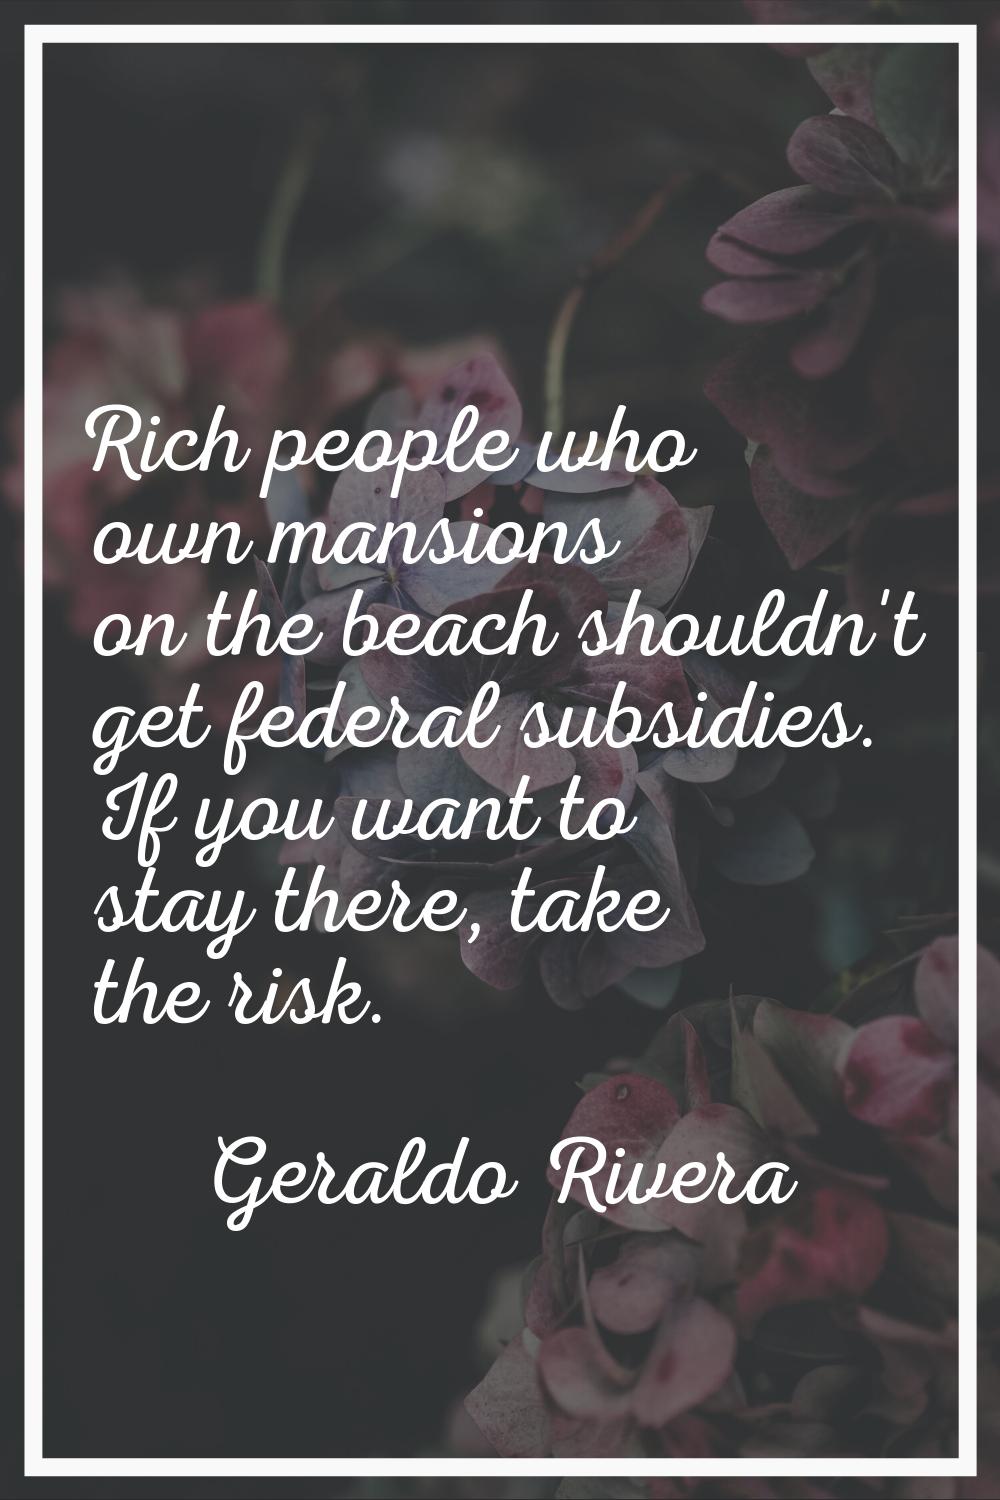 Rich people who own mansions on the beach shouldn't get federal subsidies. If you want to stay ther